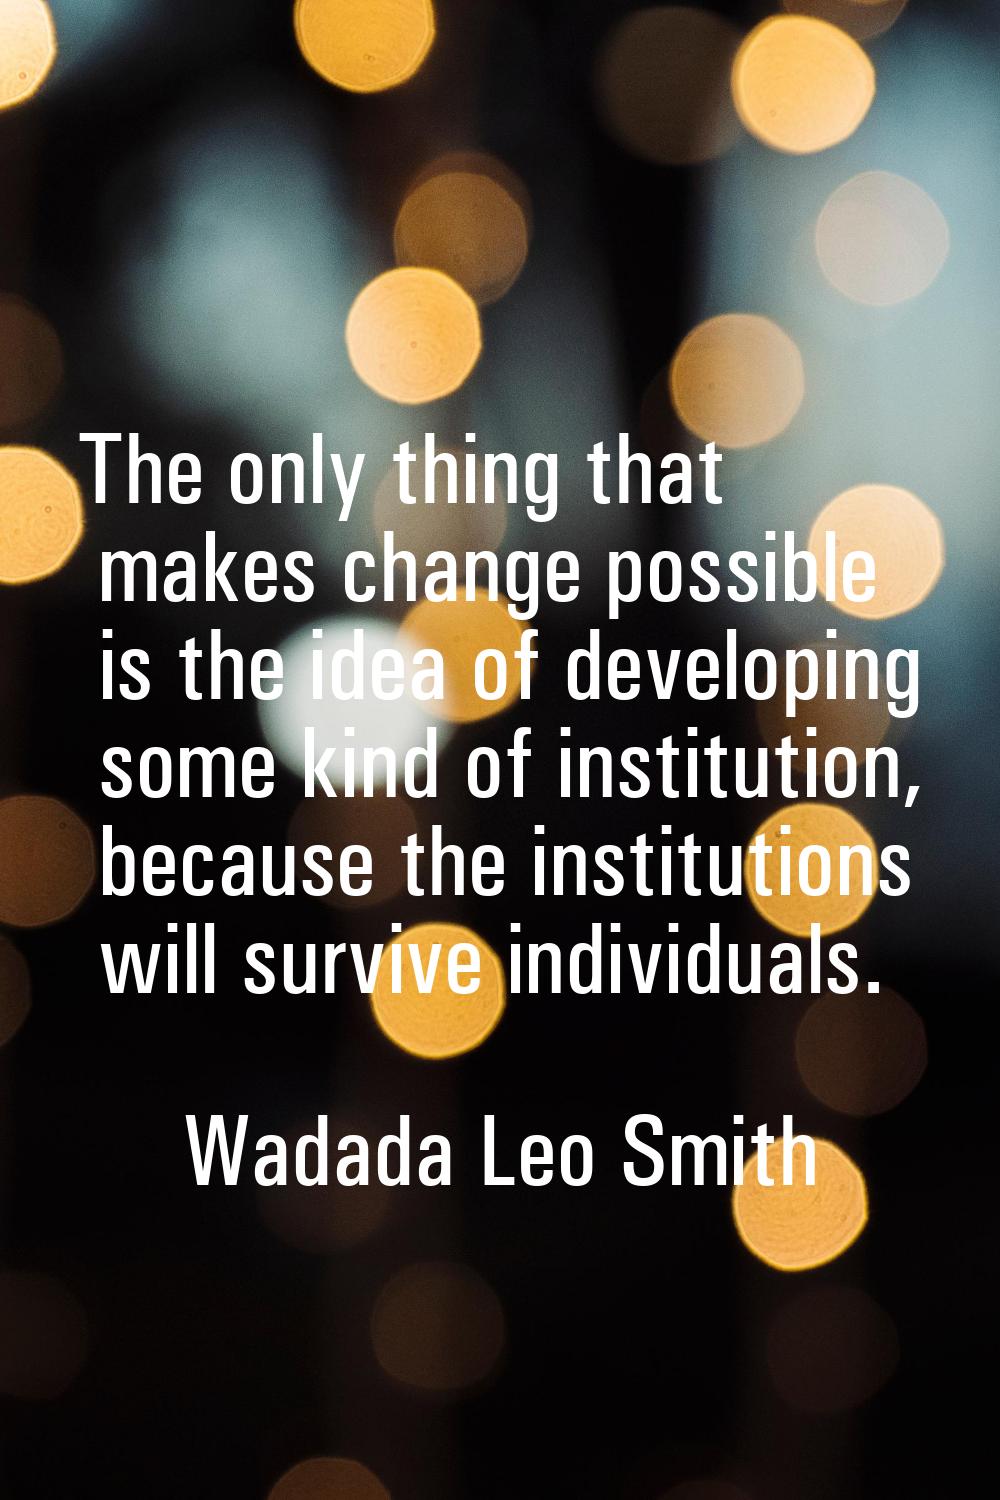 The only thing that makes change possible is the idea of developing some kind of institution, becau